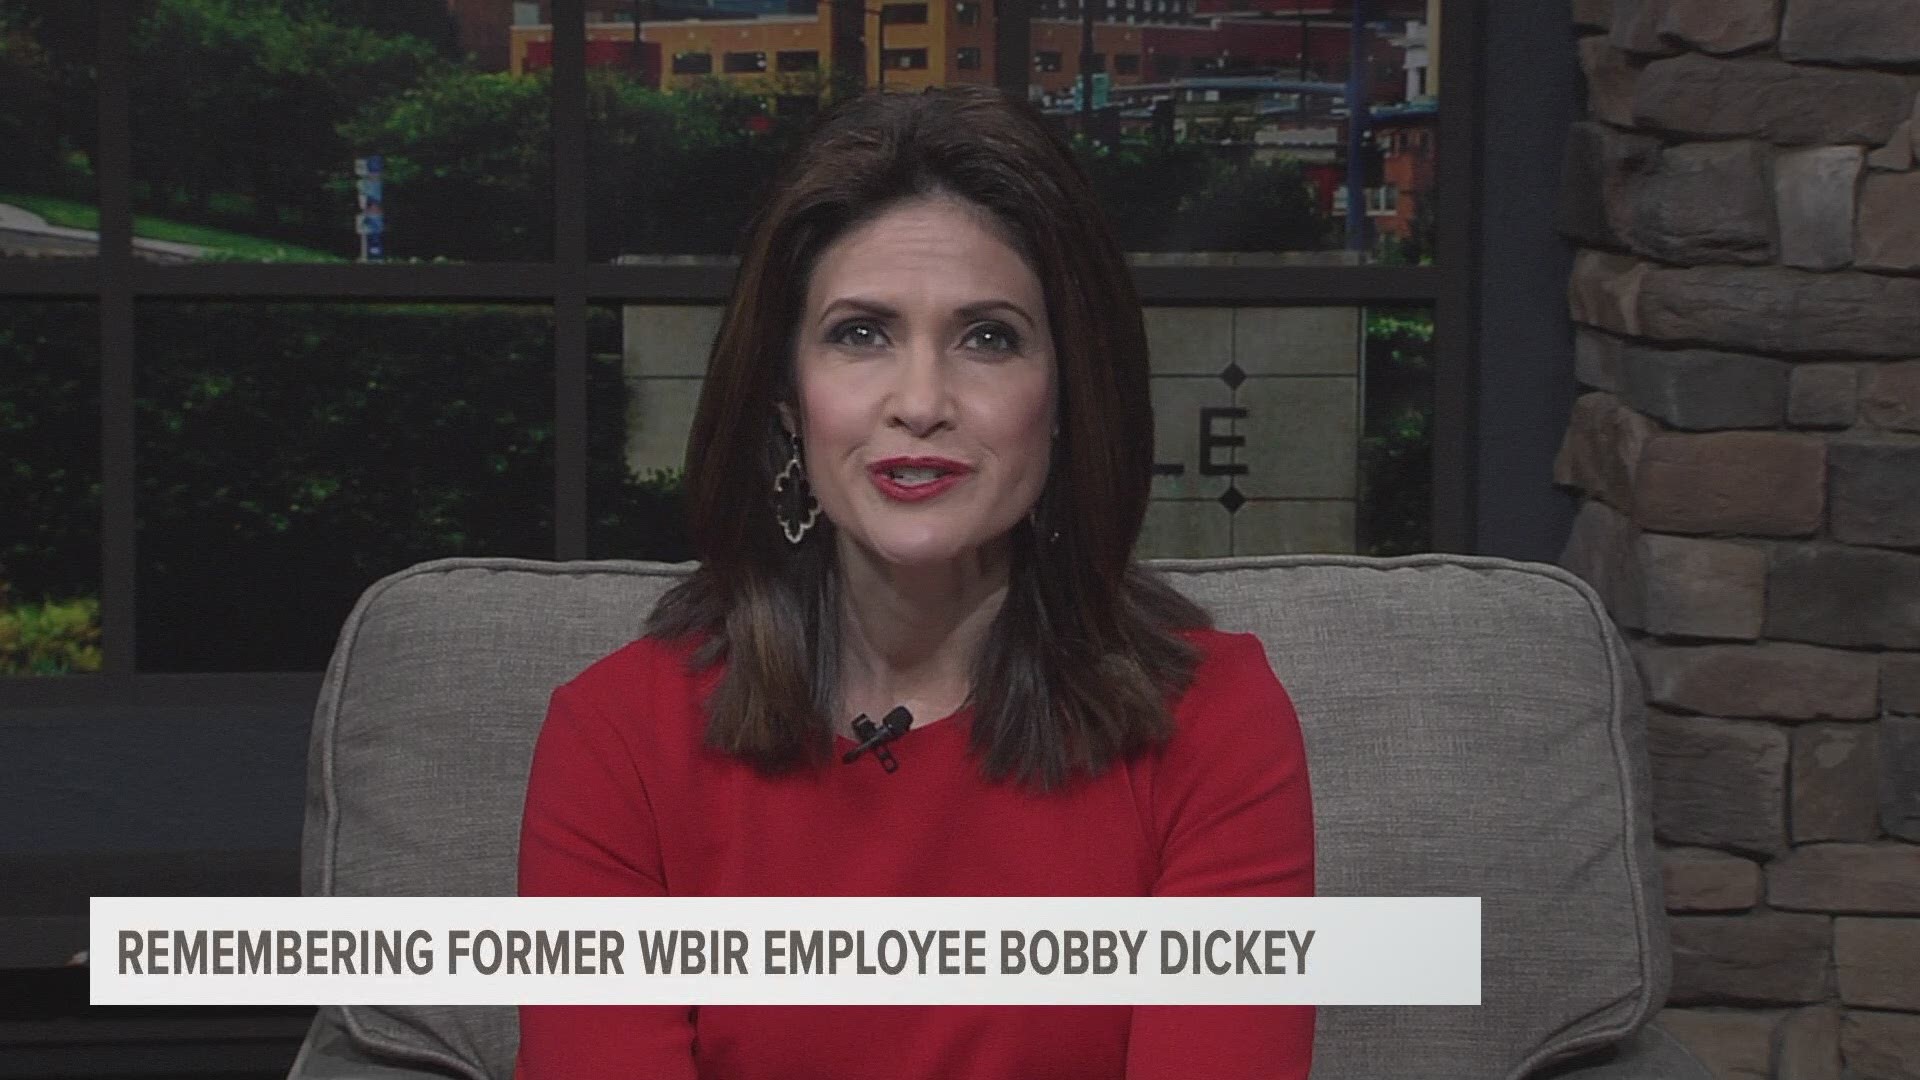 WBIR is mourning the loss of a true original: Bobby Dickey, who worked with us from 1971-2017. Bobby always had a laugh and story to share with us. He will be missed. March 18, 2019-4pm.